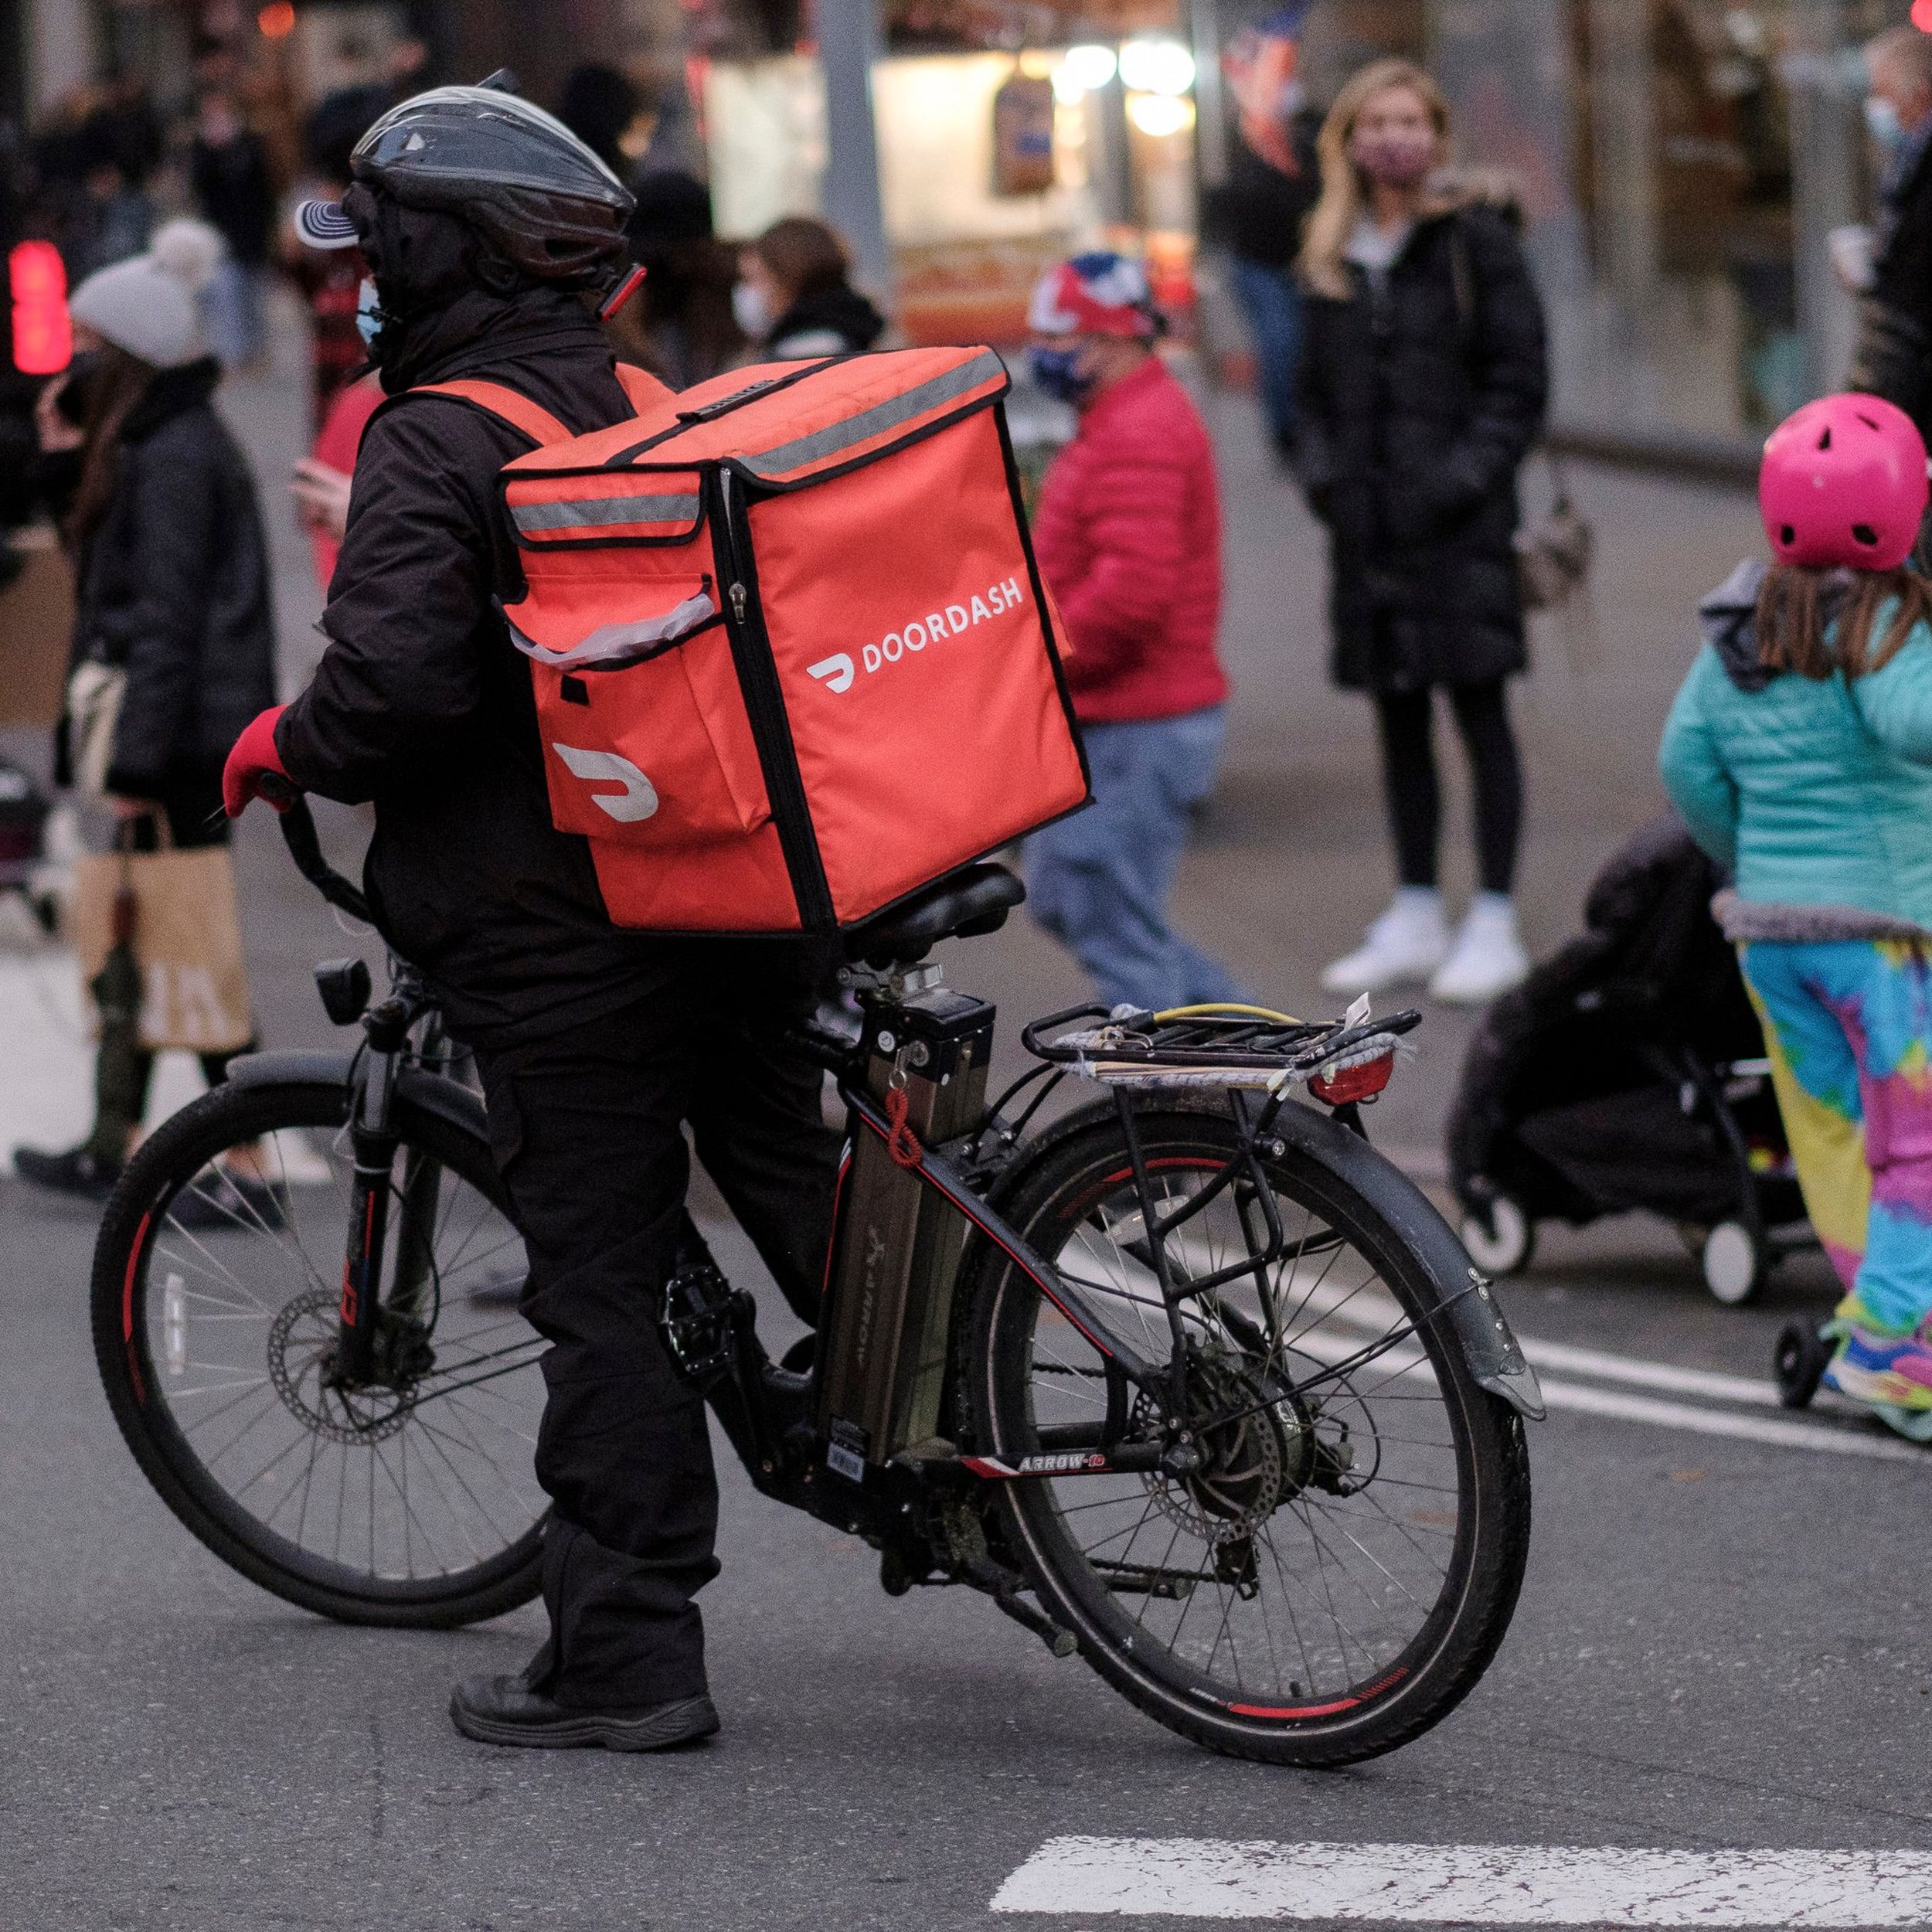 Will DoorDash Drivers Go For Its Hourly Pay Option? - RetailWire